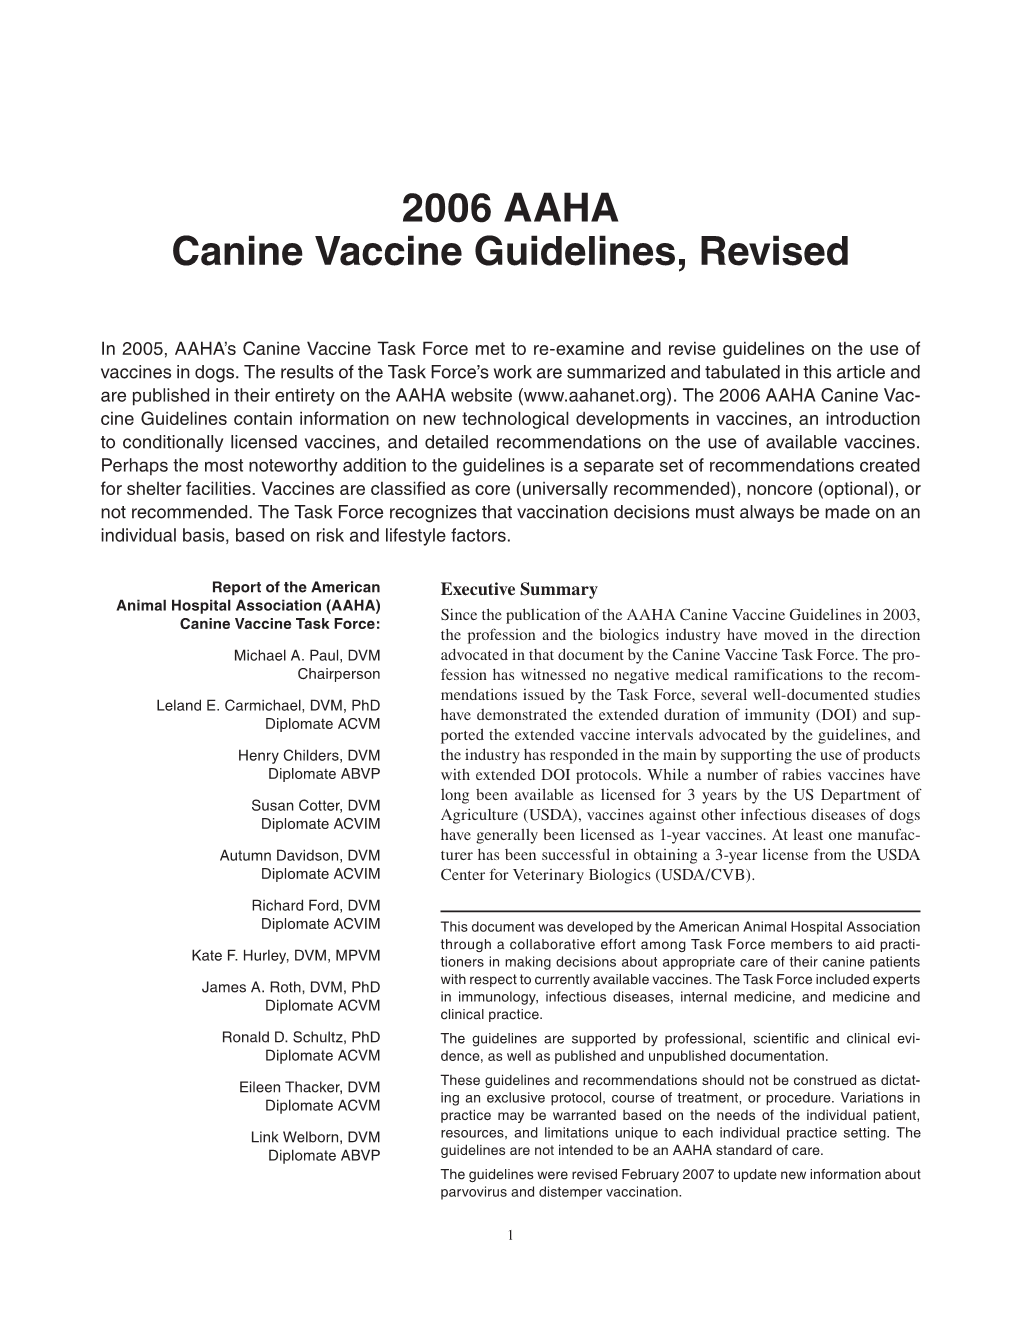 2006 AAHA Canine Vaccine Guidelines, Revised